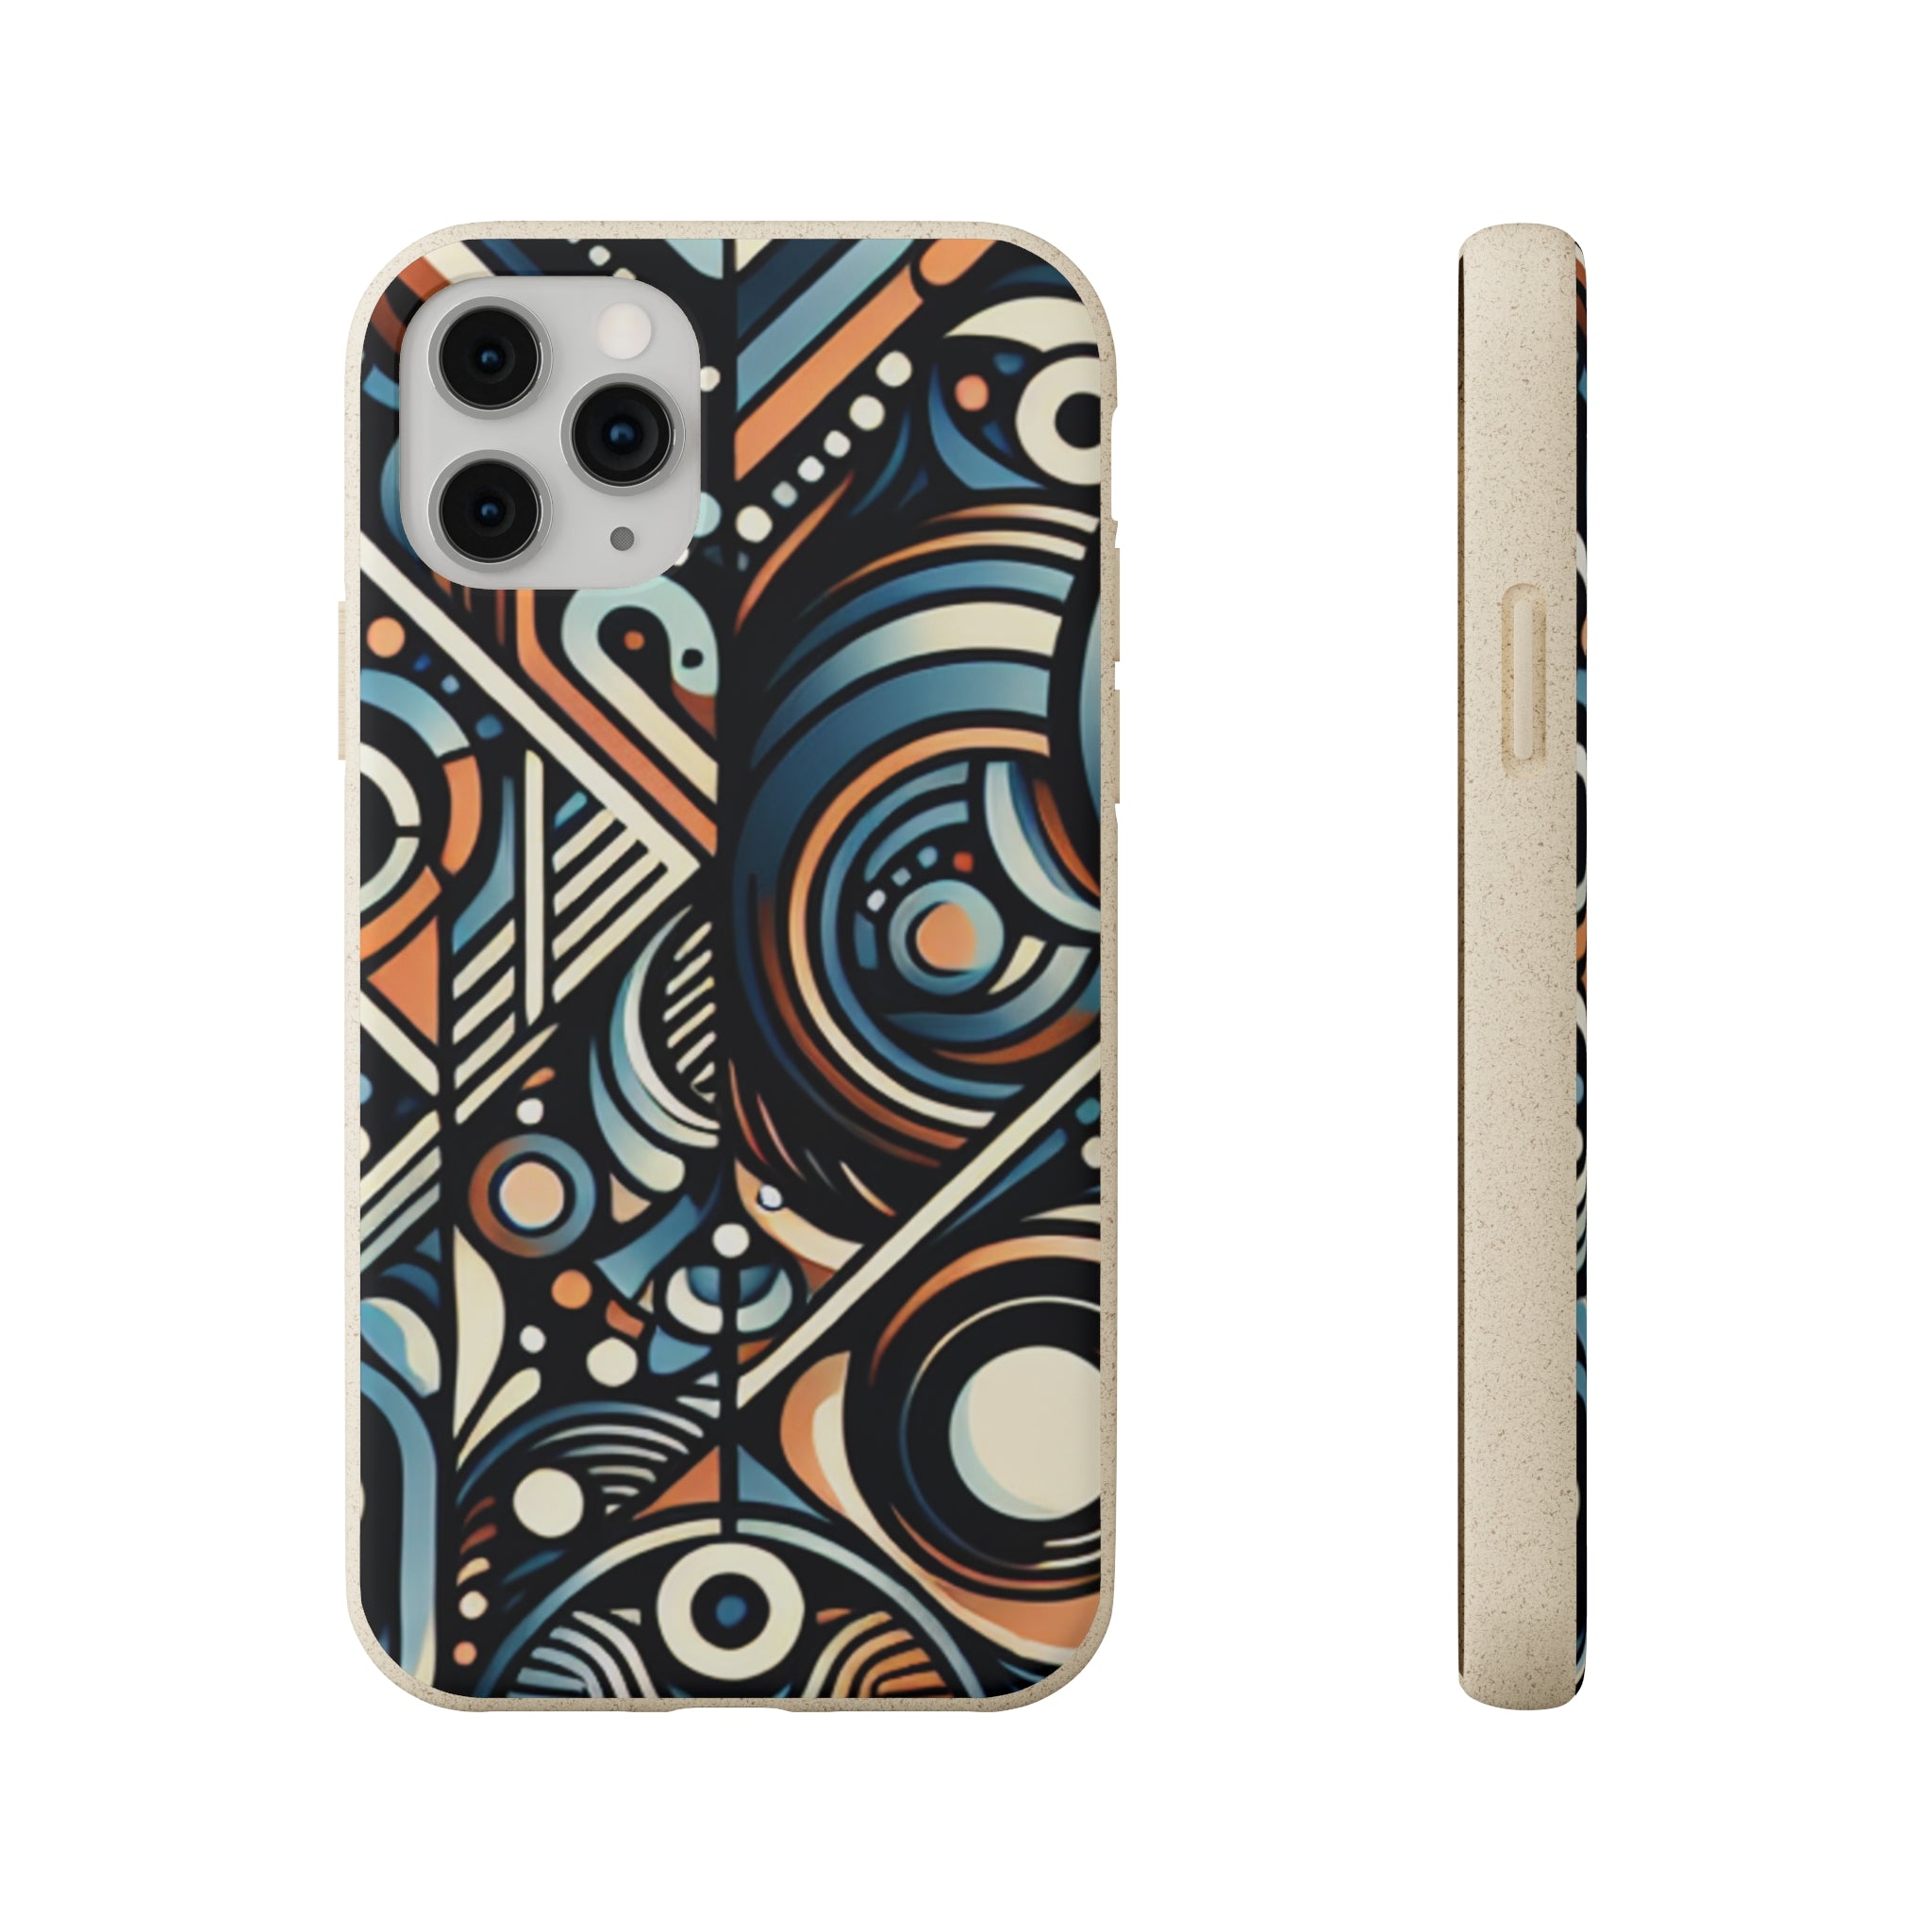 Abigail Moore - Biodegradable iPhone Cases